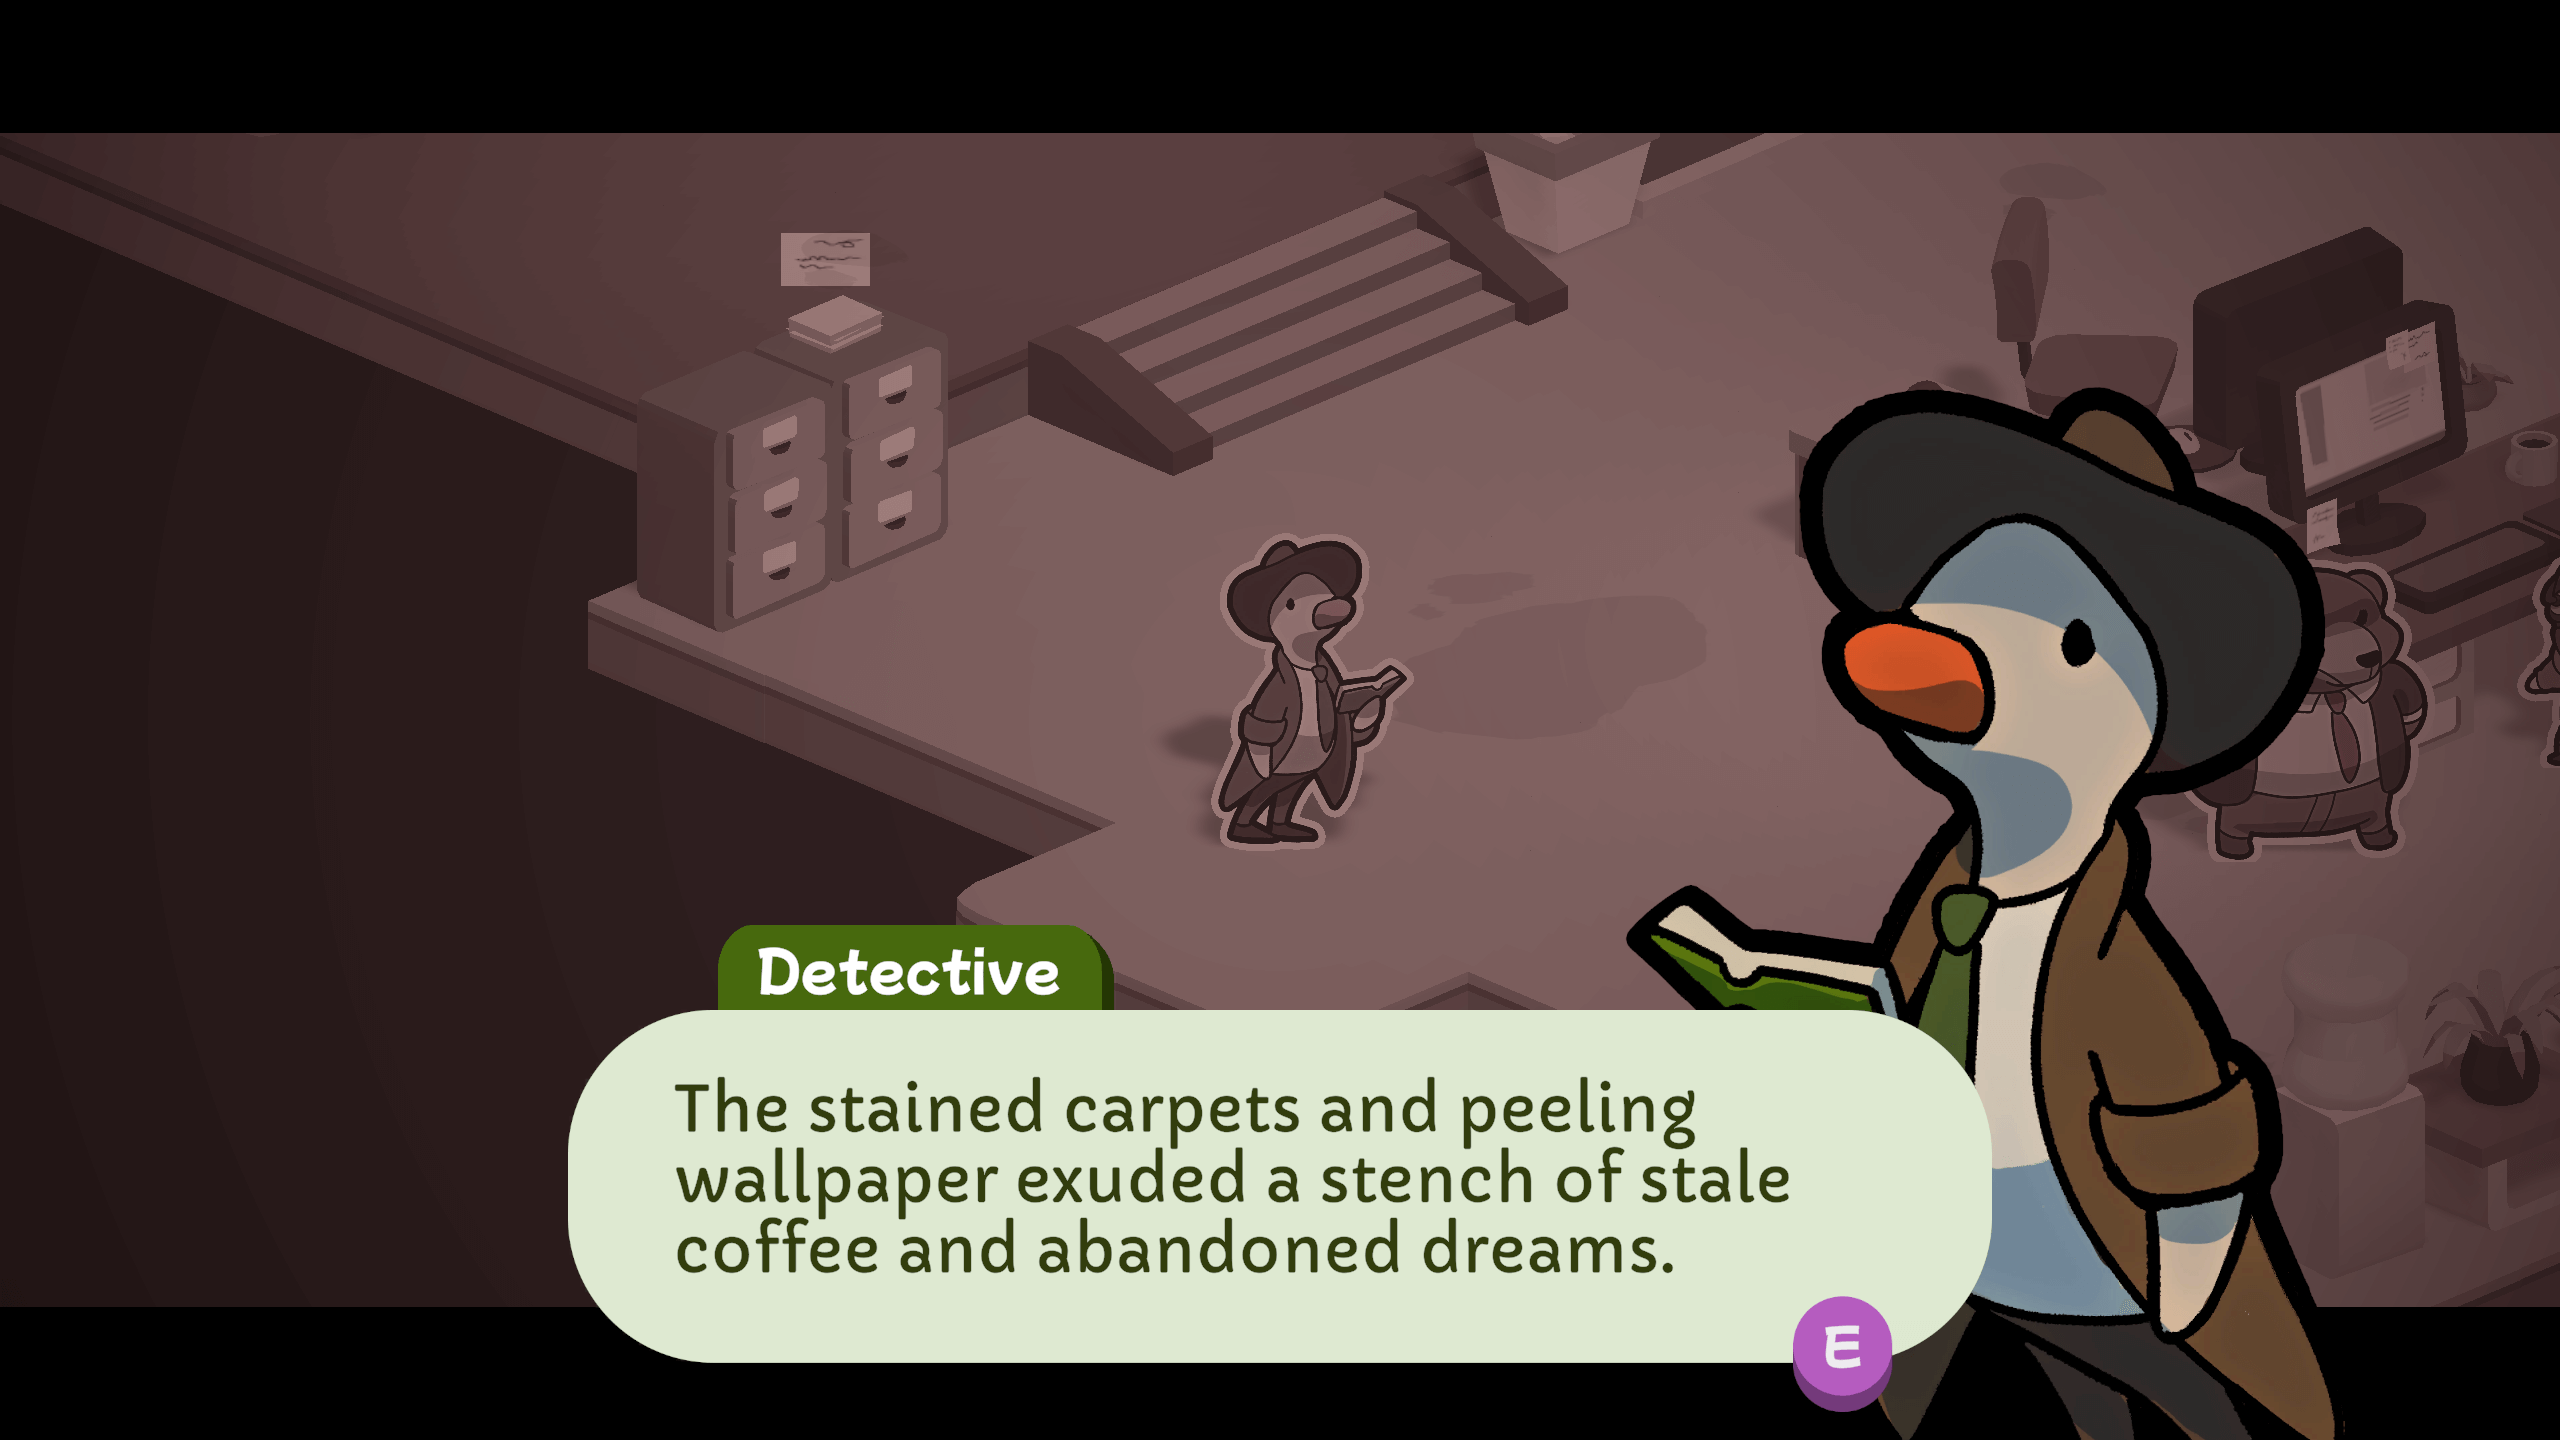 A screenshot of Duck Detective: The Secret Salami. This is an inner monologue sceene from Eugene McQuacklin. He is a duck wearing a brown fedora and tan trenchcoat, with a green tie that matches his notebook. He is stood in an office and describes it as "the stained carpets and peeling wallpaper exuded a stench of stale coffee and abandoned dreams." There is a sepia toned filter. 